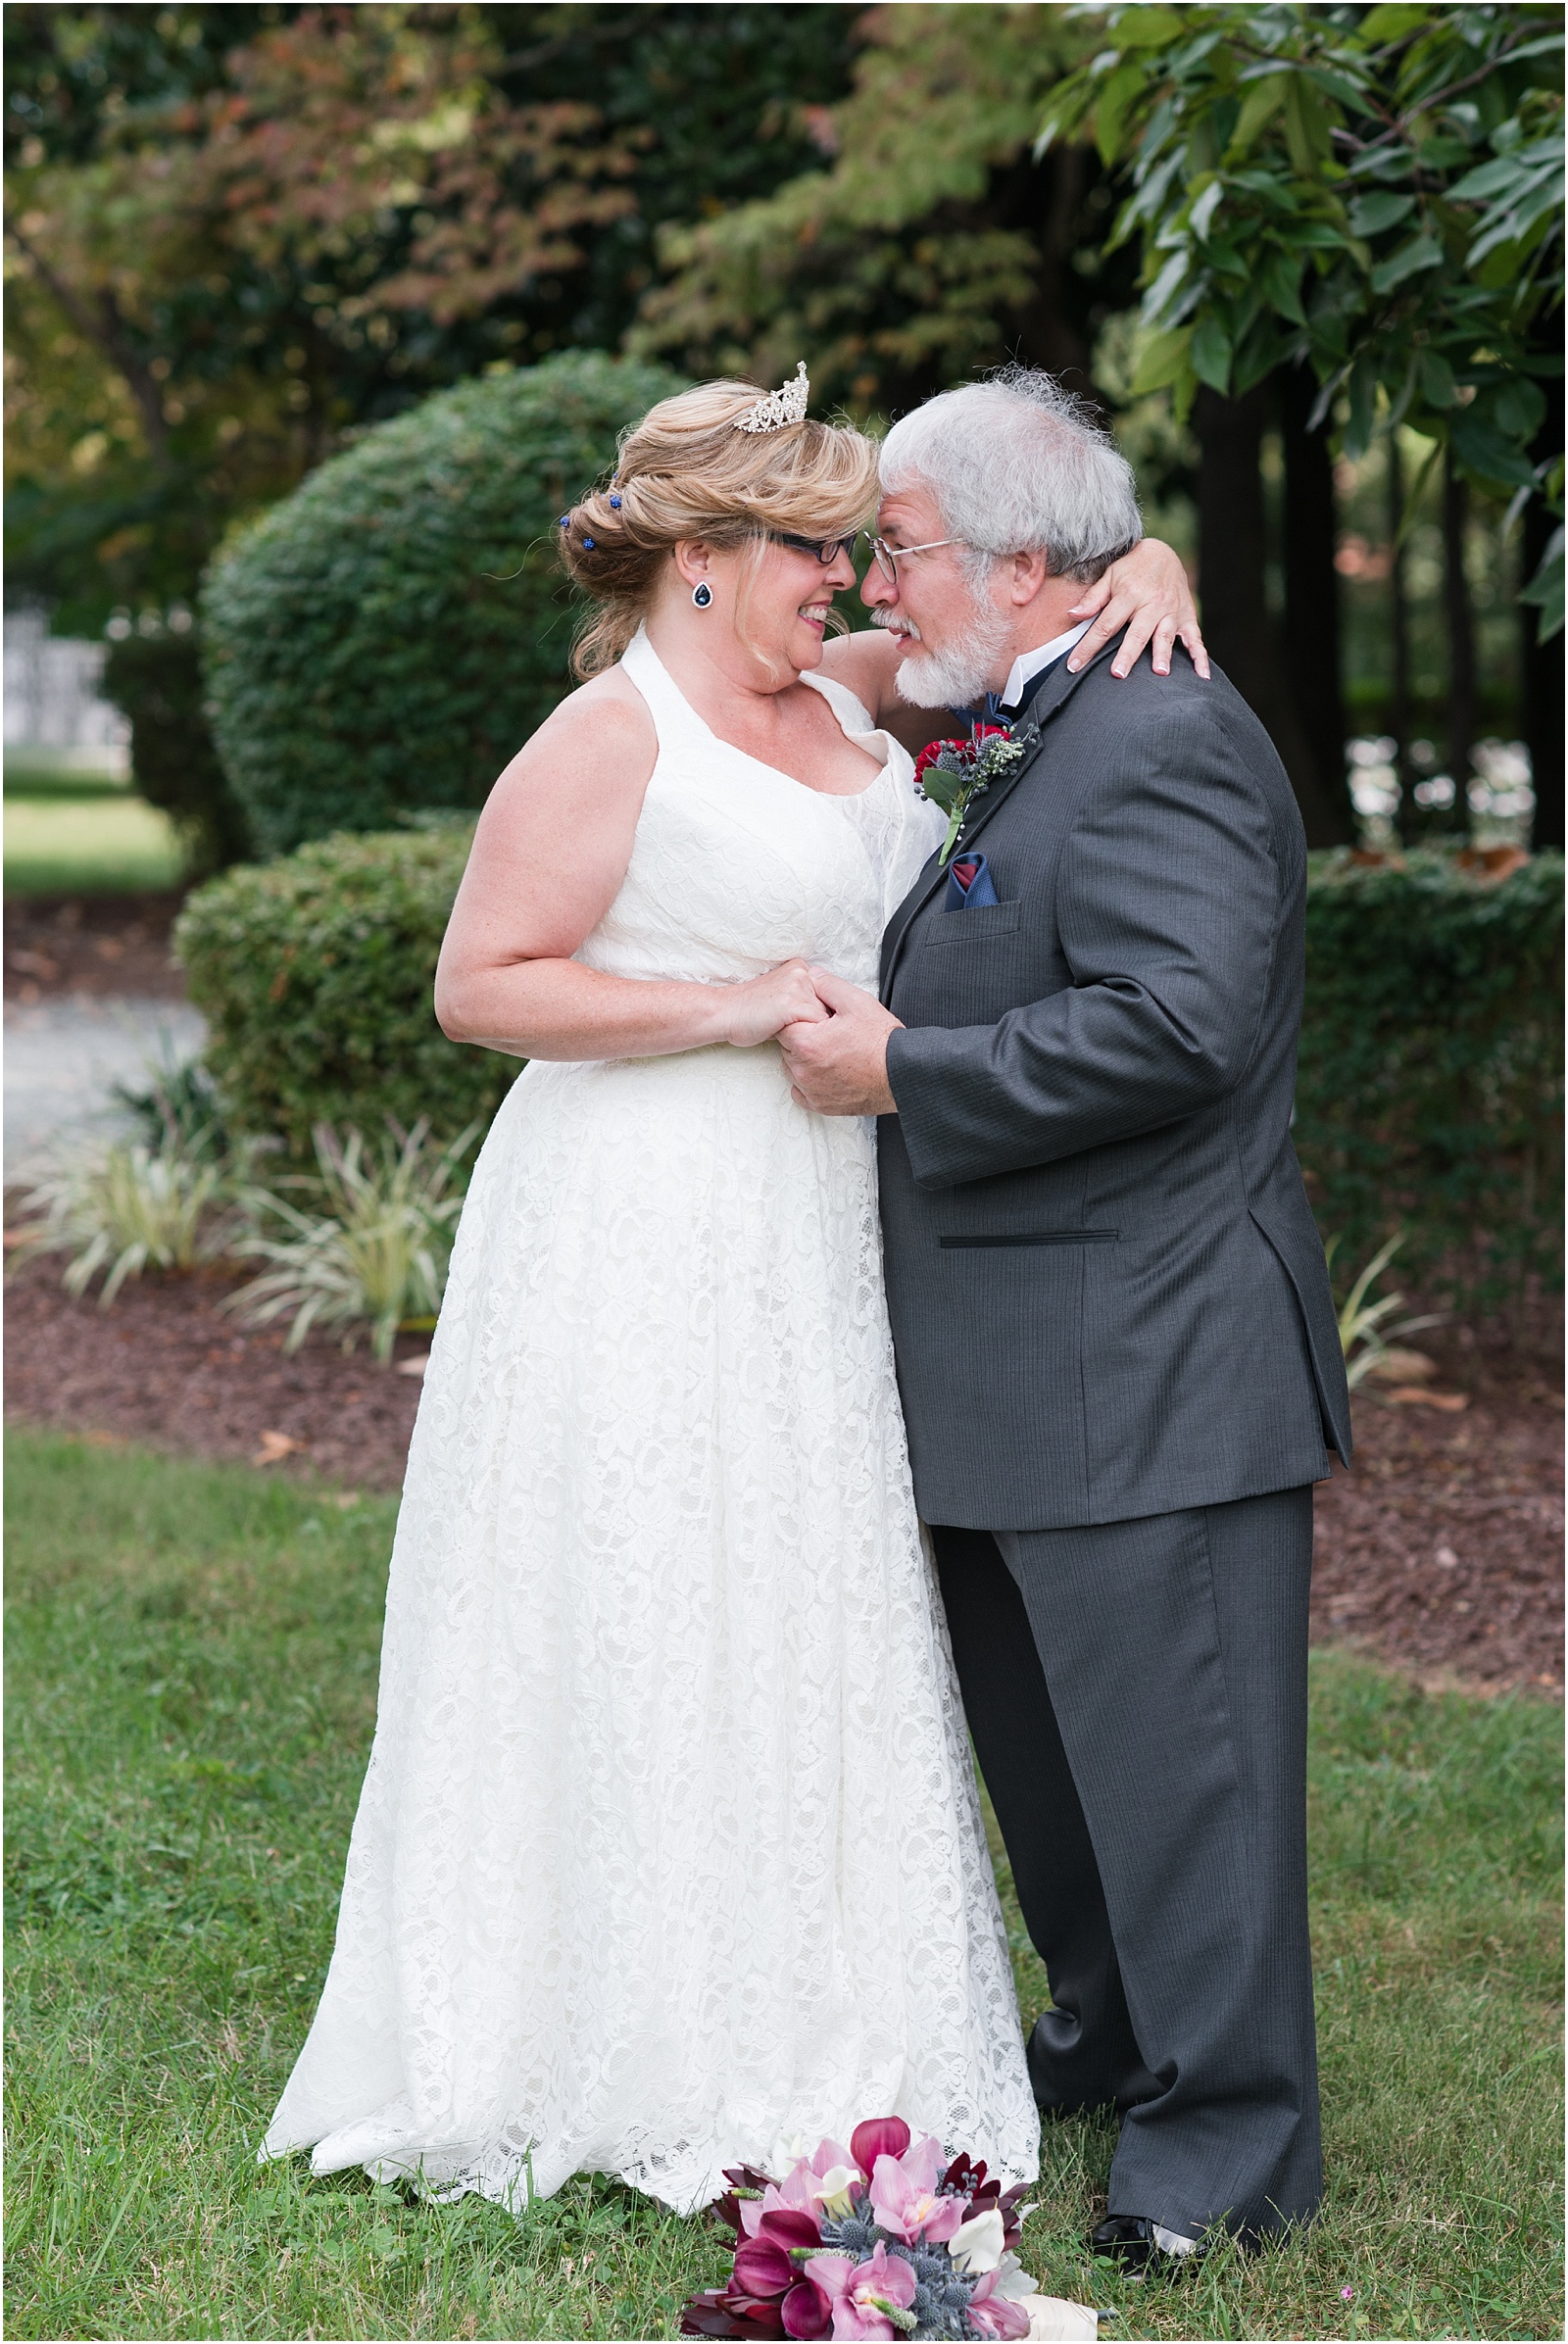 Michelle and Sara Photography, Michelle and Sara weddings, michelle robinson photography, burke manor inn, bride and groom couple session, 